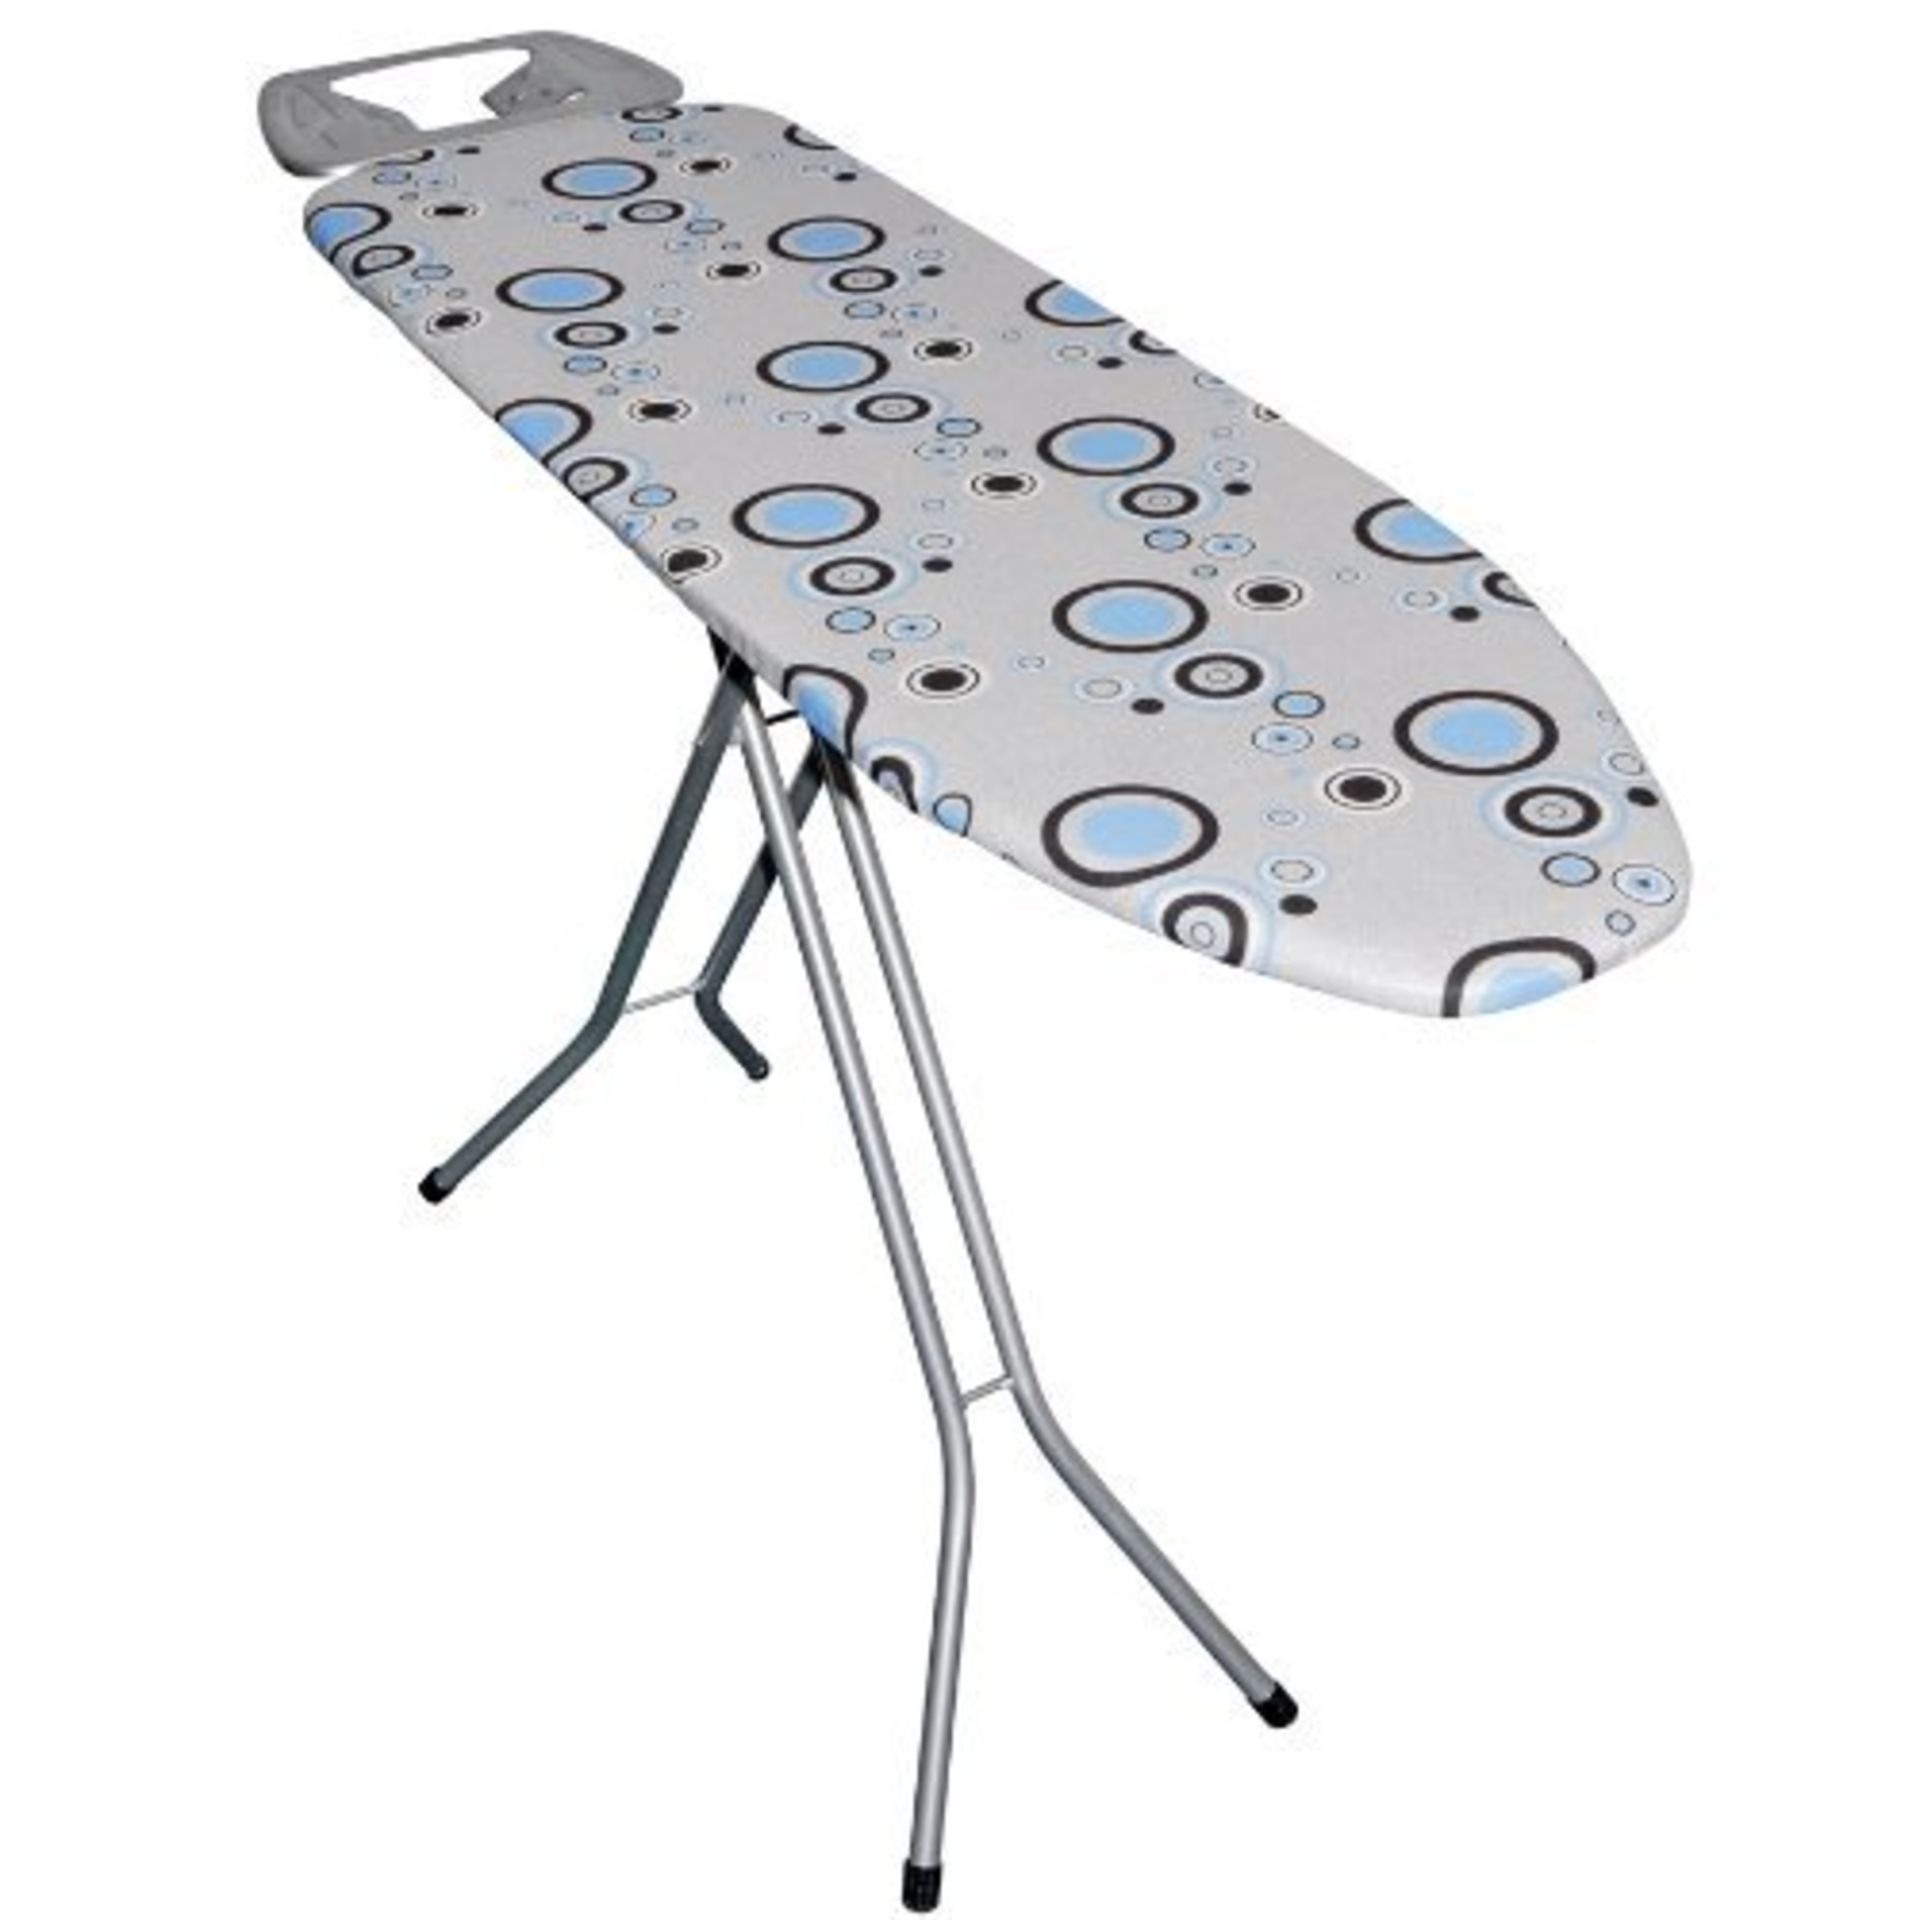 V Brand New 33 x 109cm Ironing Board Design May Vary From Image